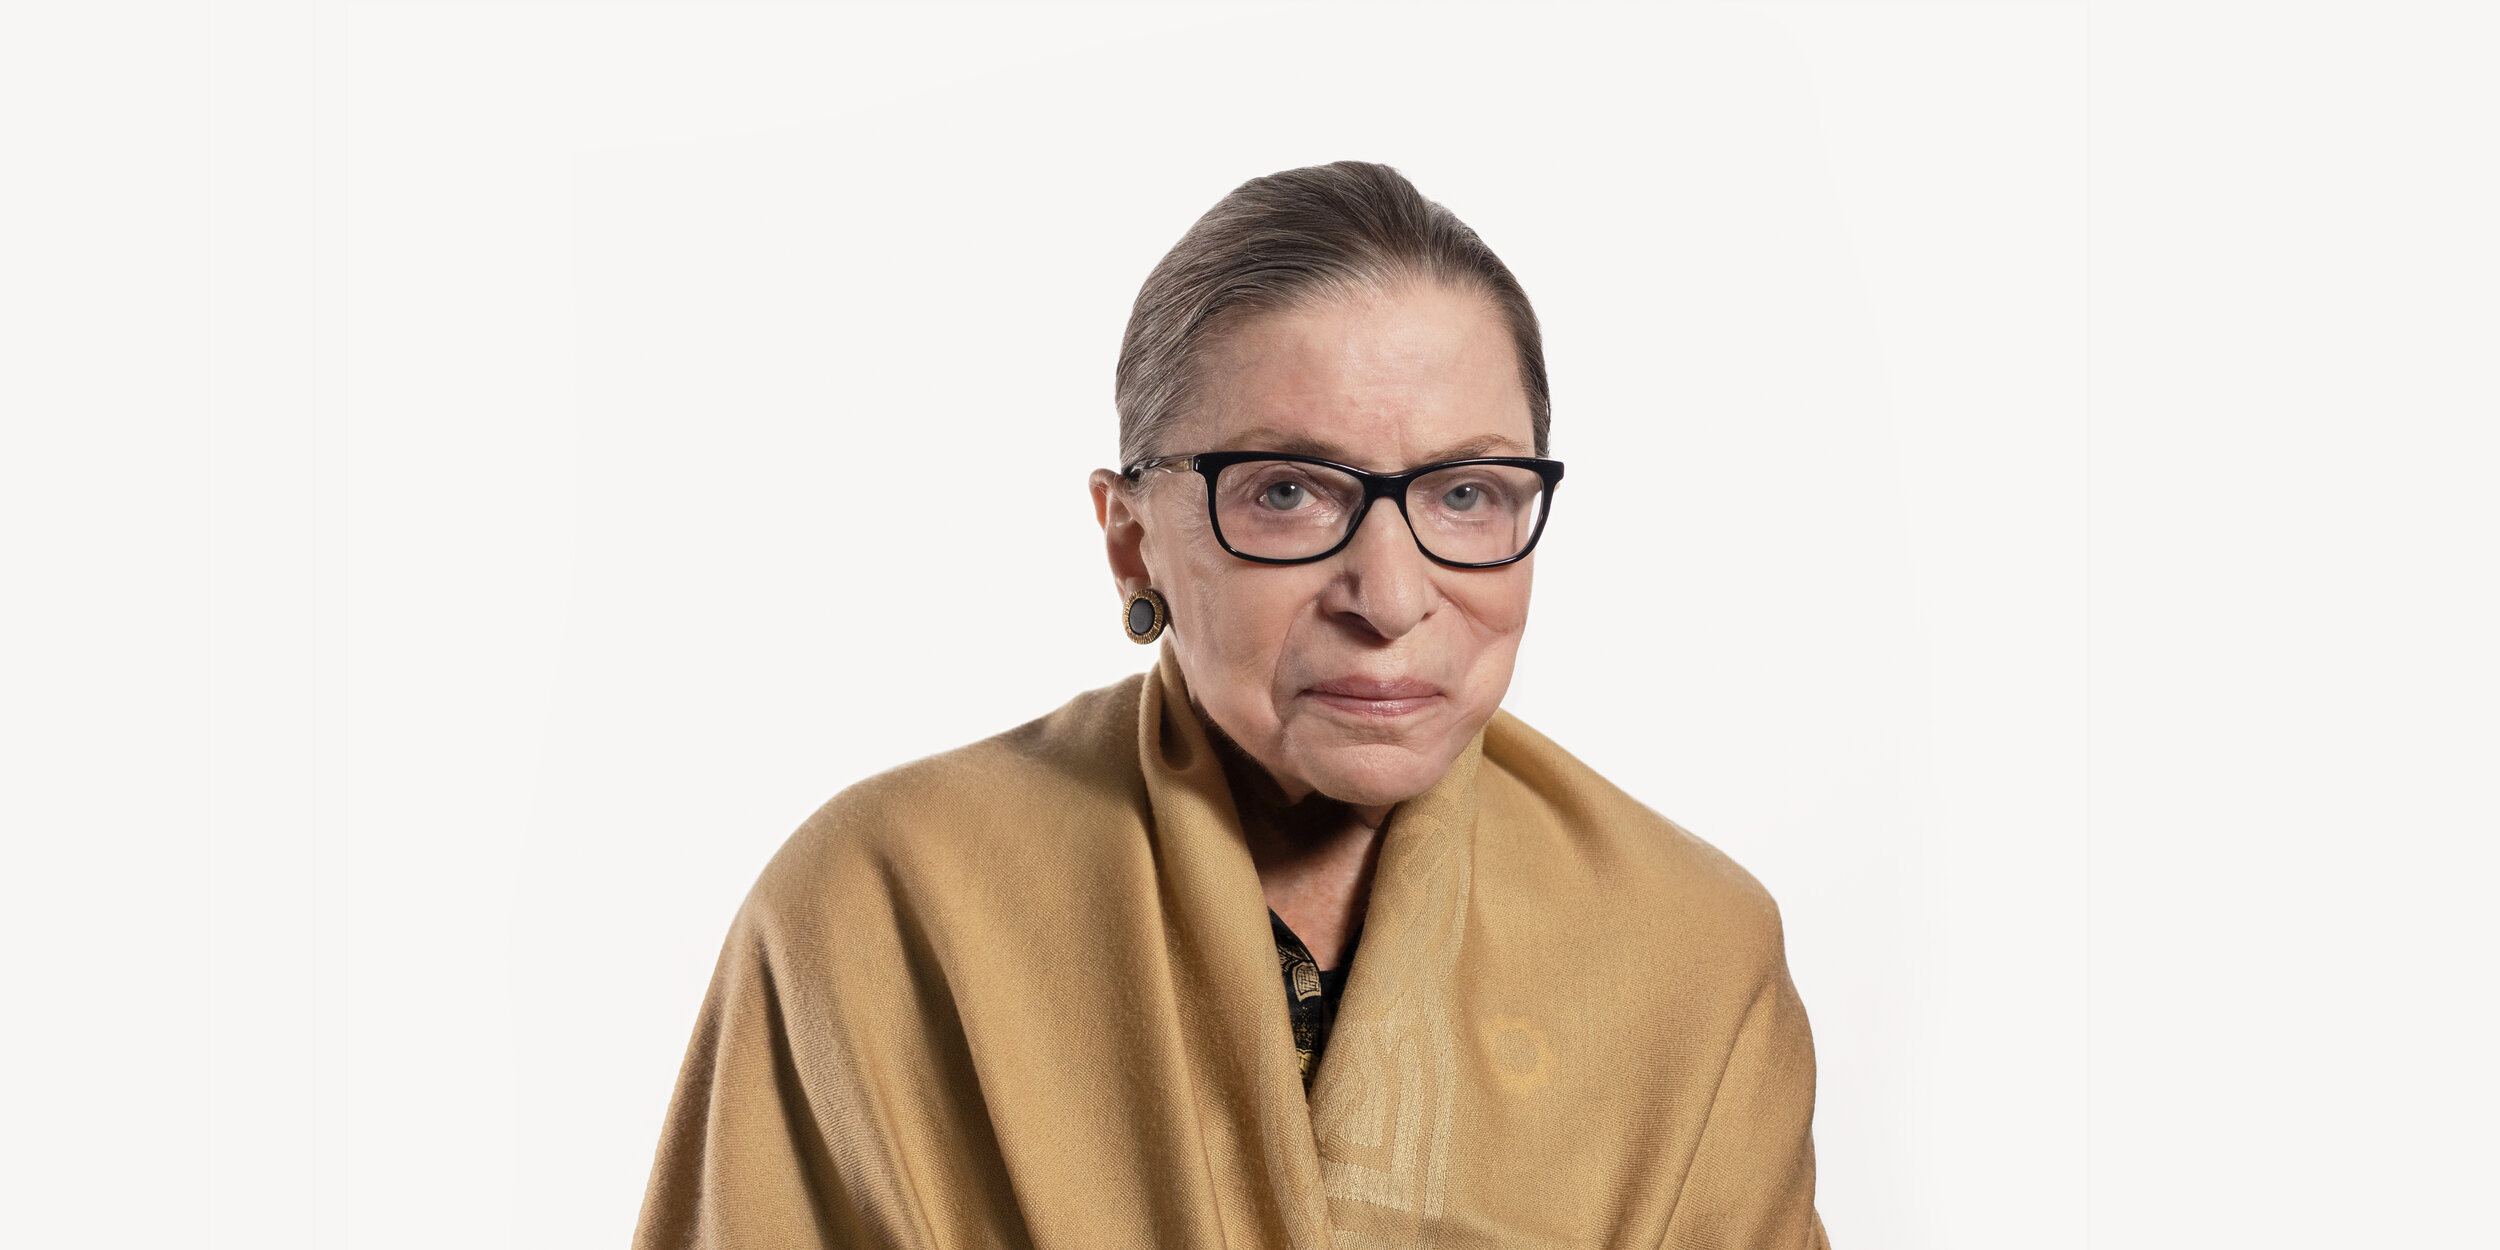 I know this to be true_Banner_Contributor_Ruth Bader Ginsburg.jpg